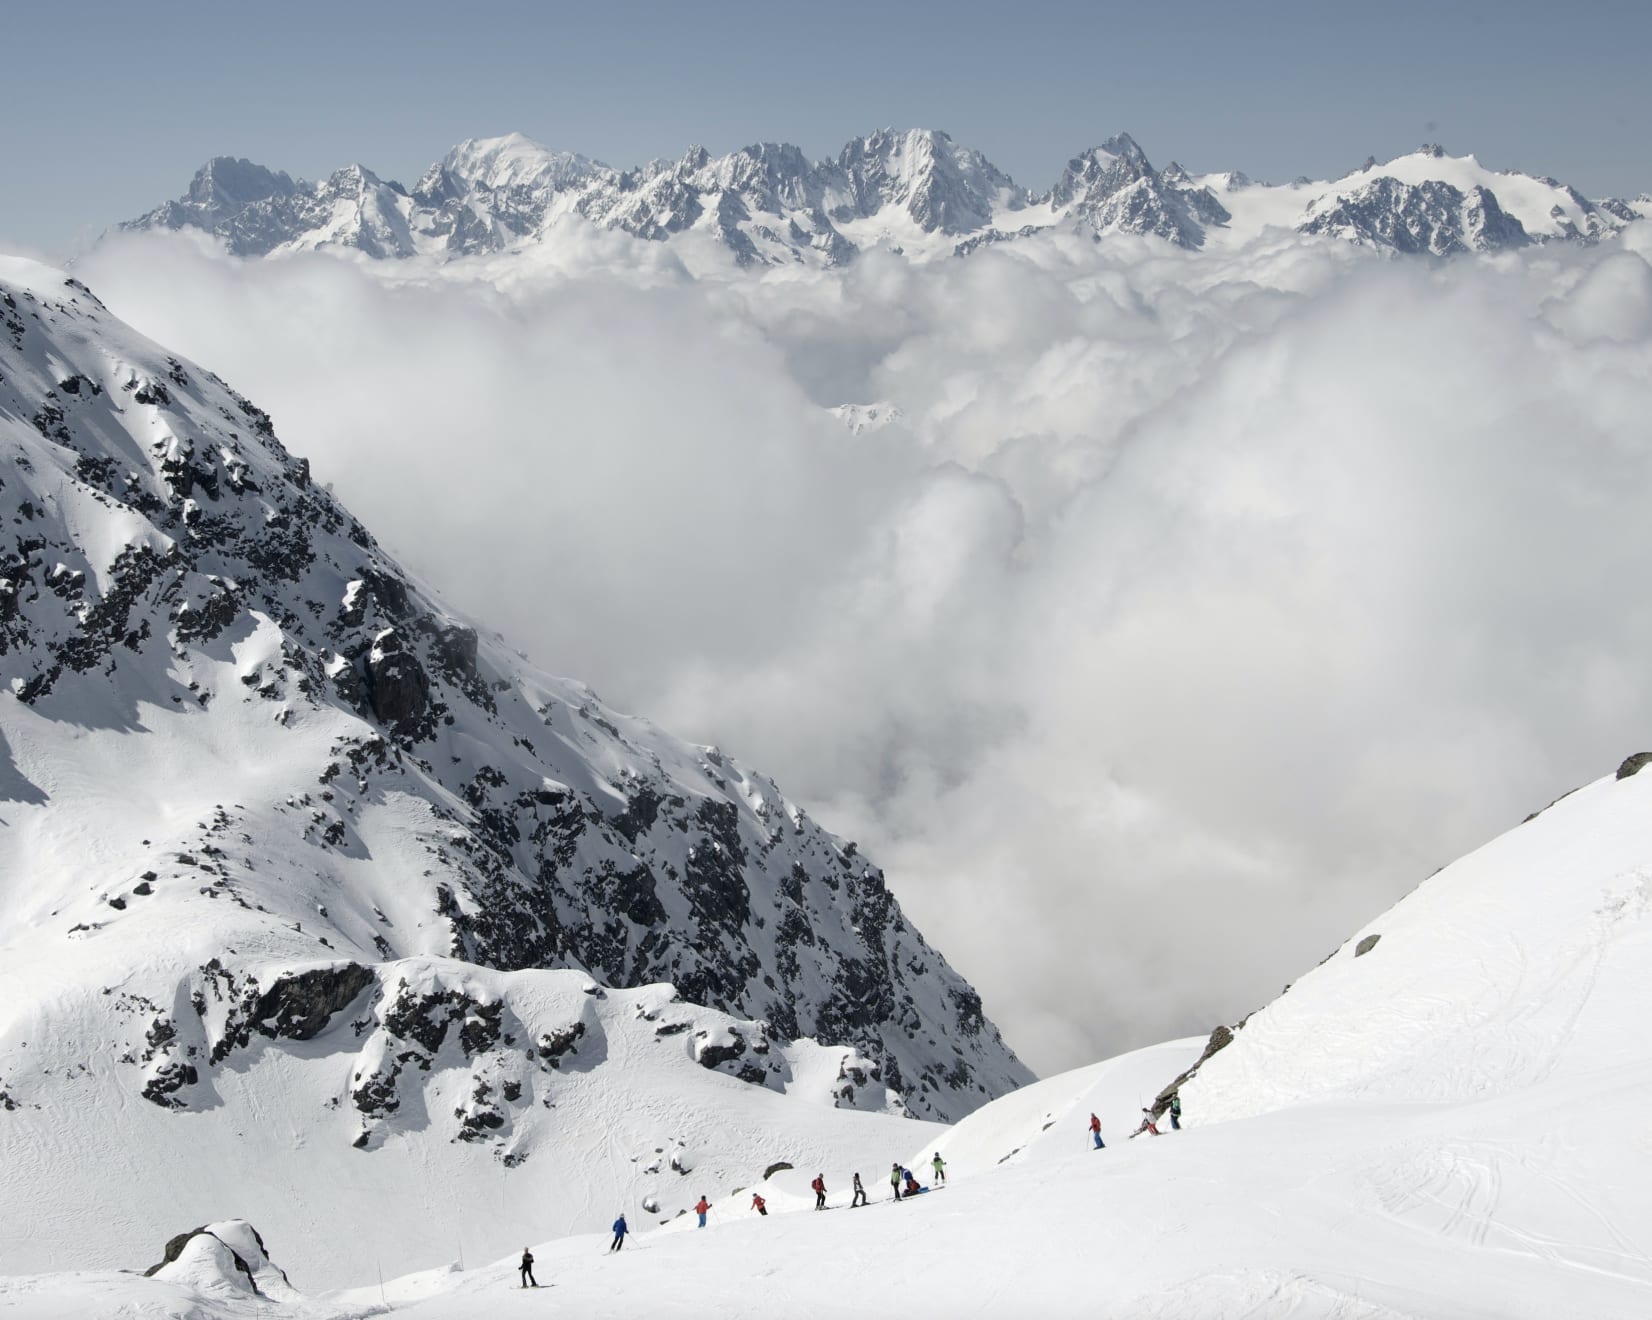 Into the Clouds (Verbier), 2014